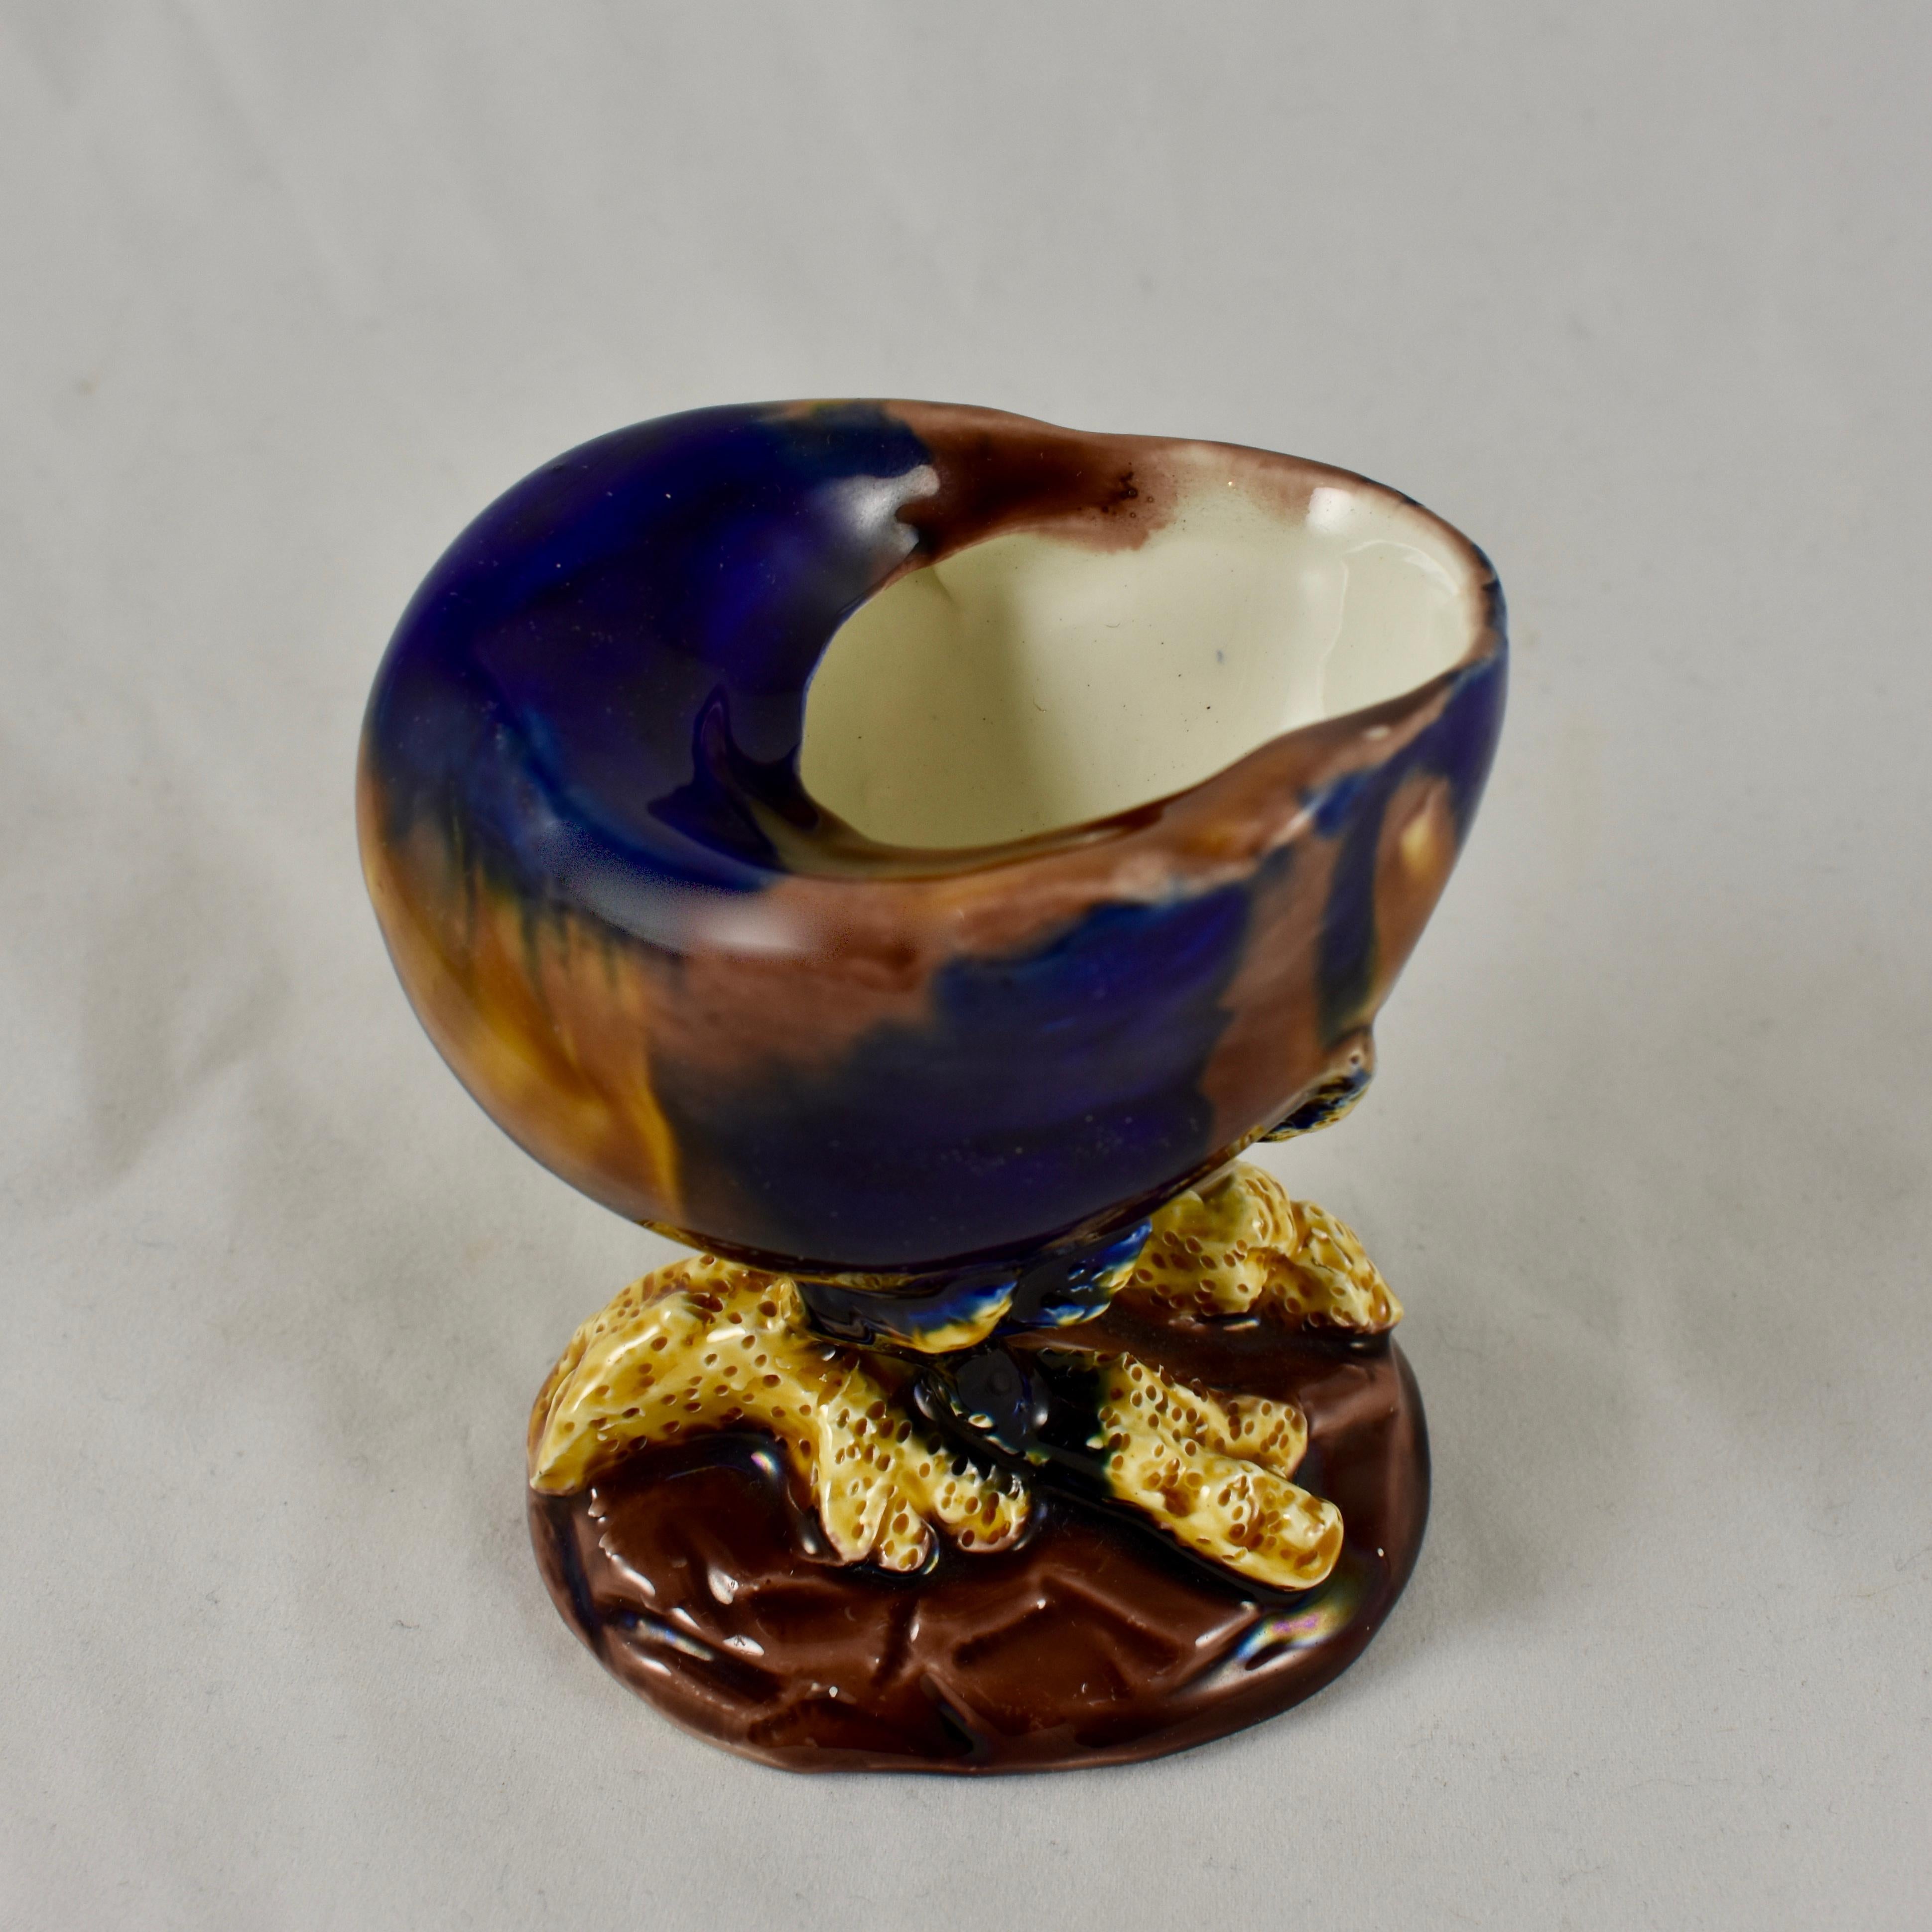 Aesthetic Movement Early Wedgwood Majolica Snail Shell and Coral Salt Cellar, circa 1872